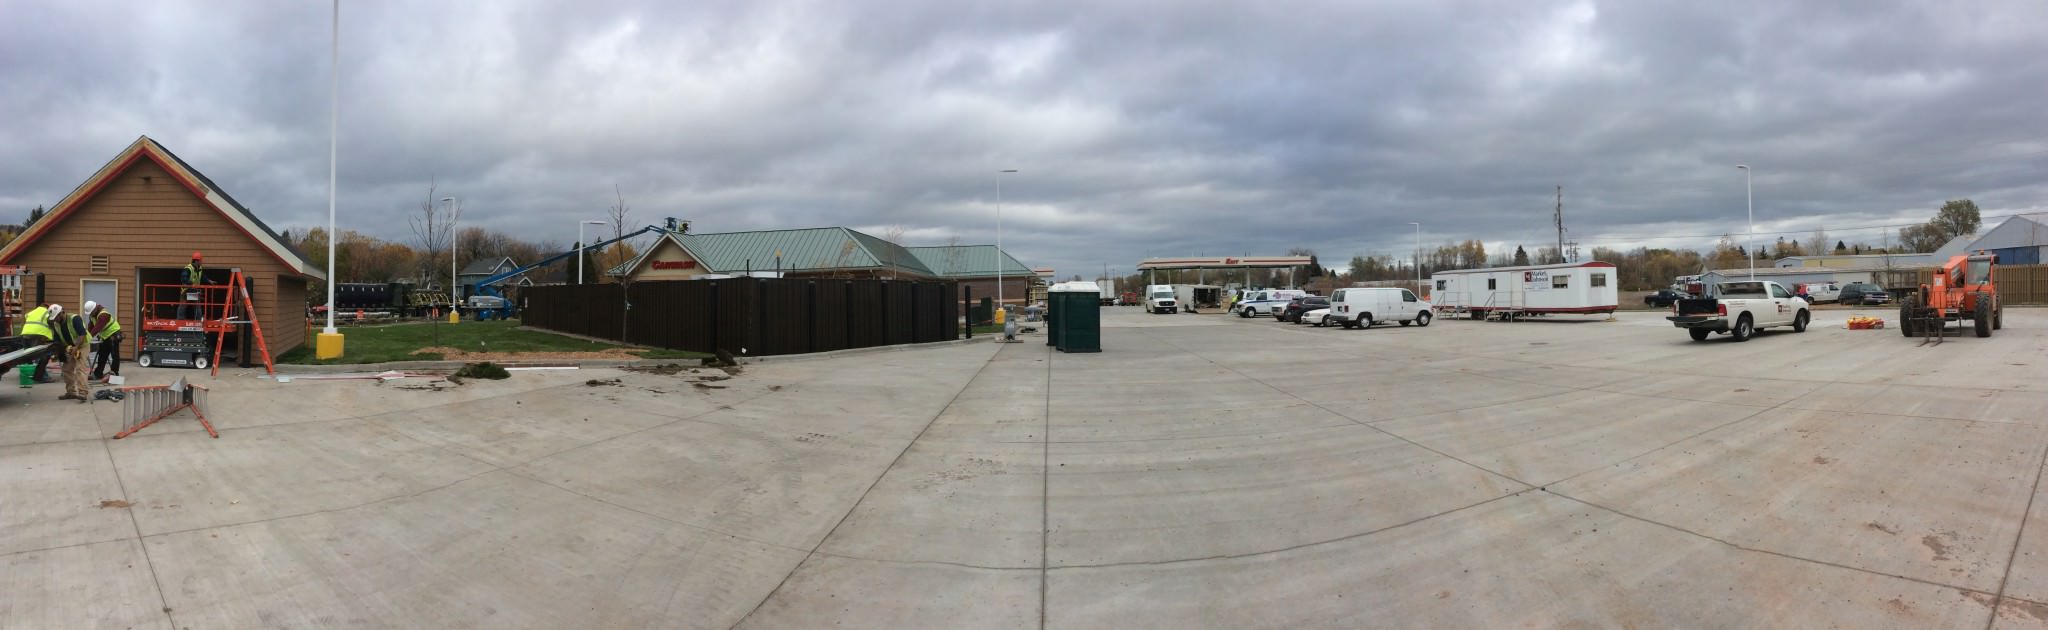 Gas station construction panorama view of electrical work